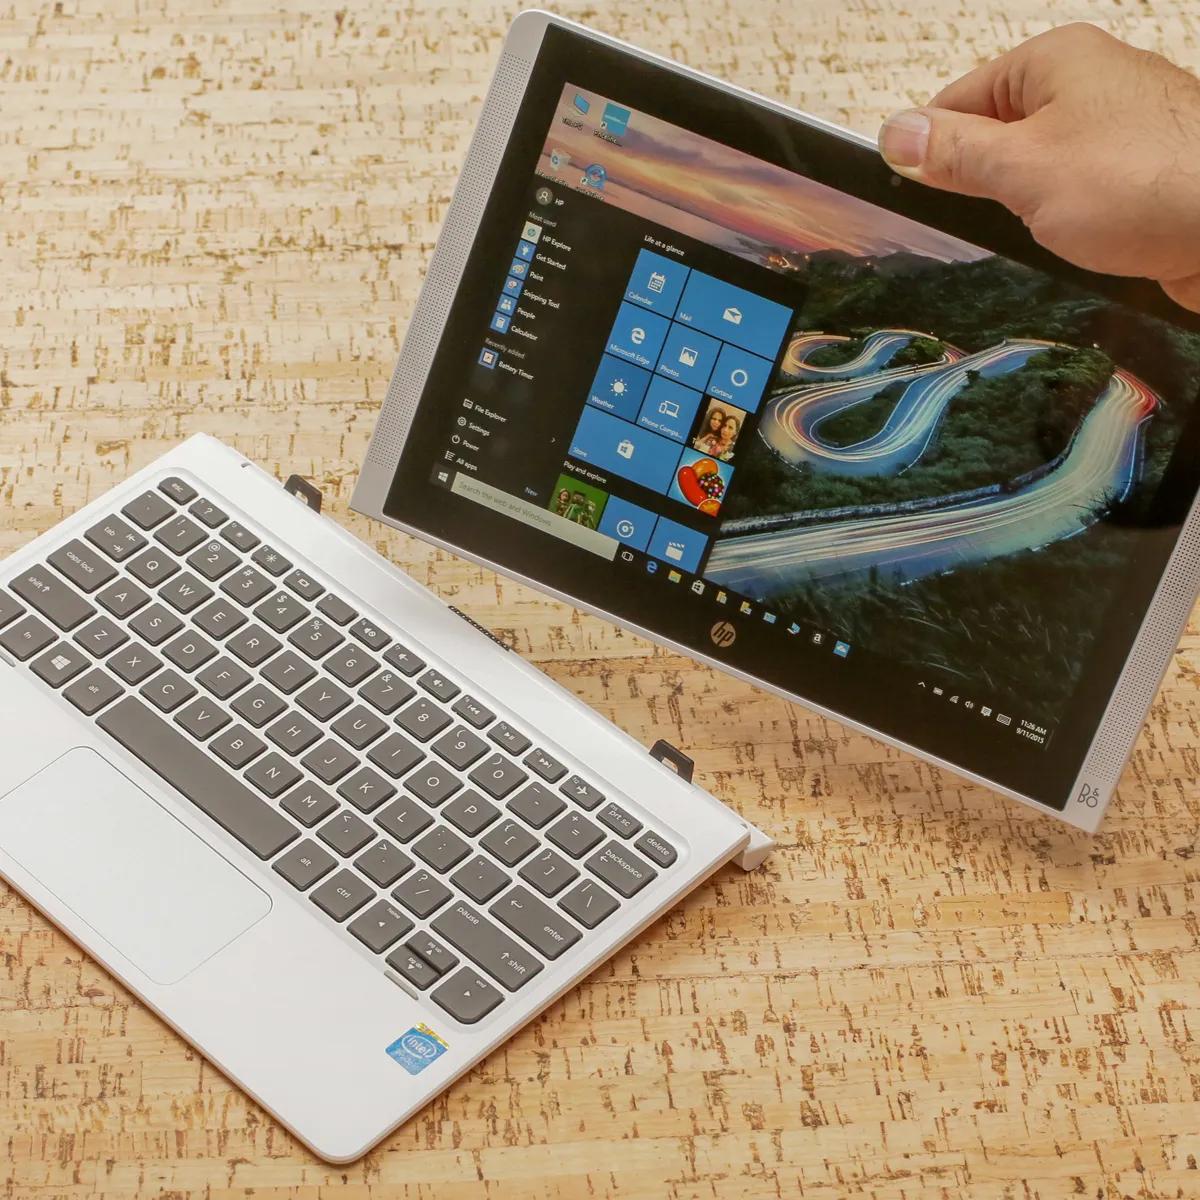 Hewlett packard tablets and laptops: a comprehensive guide